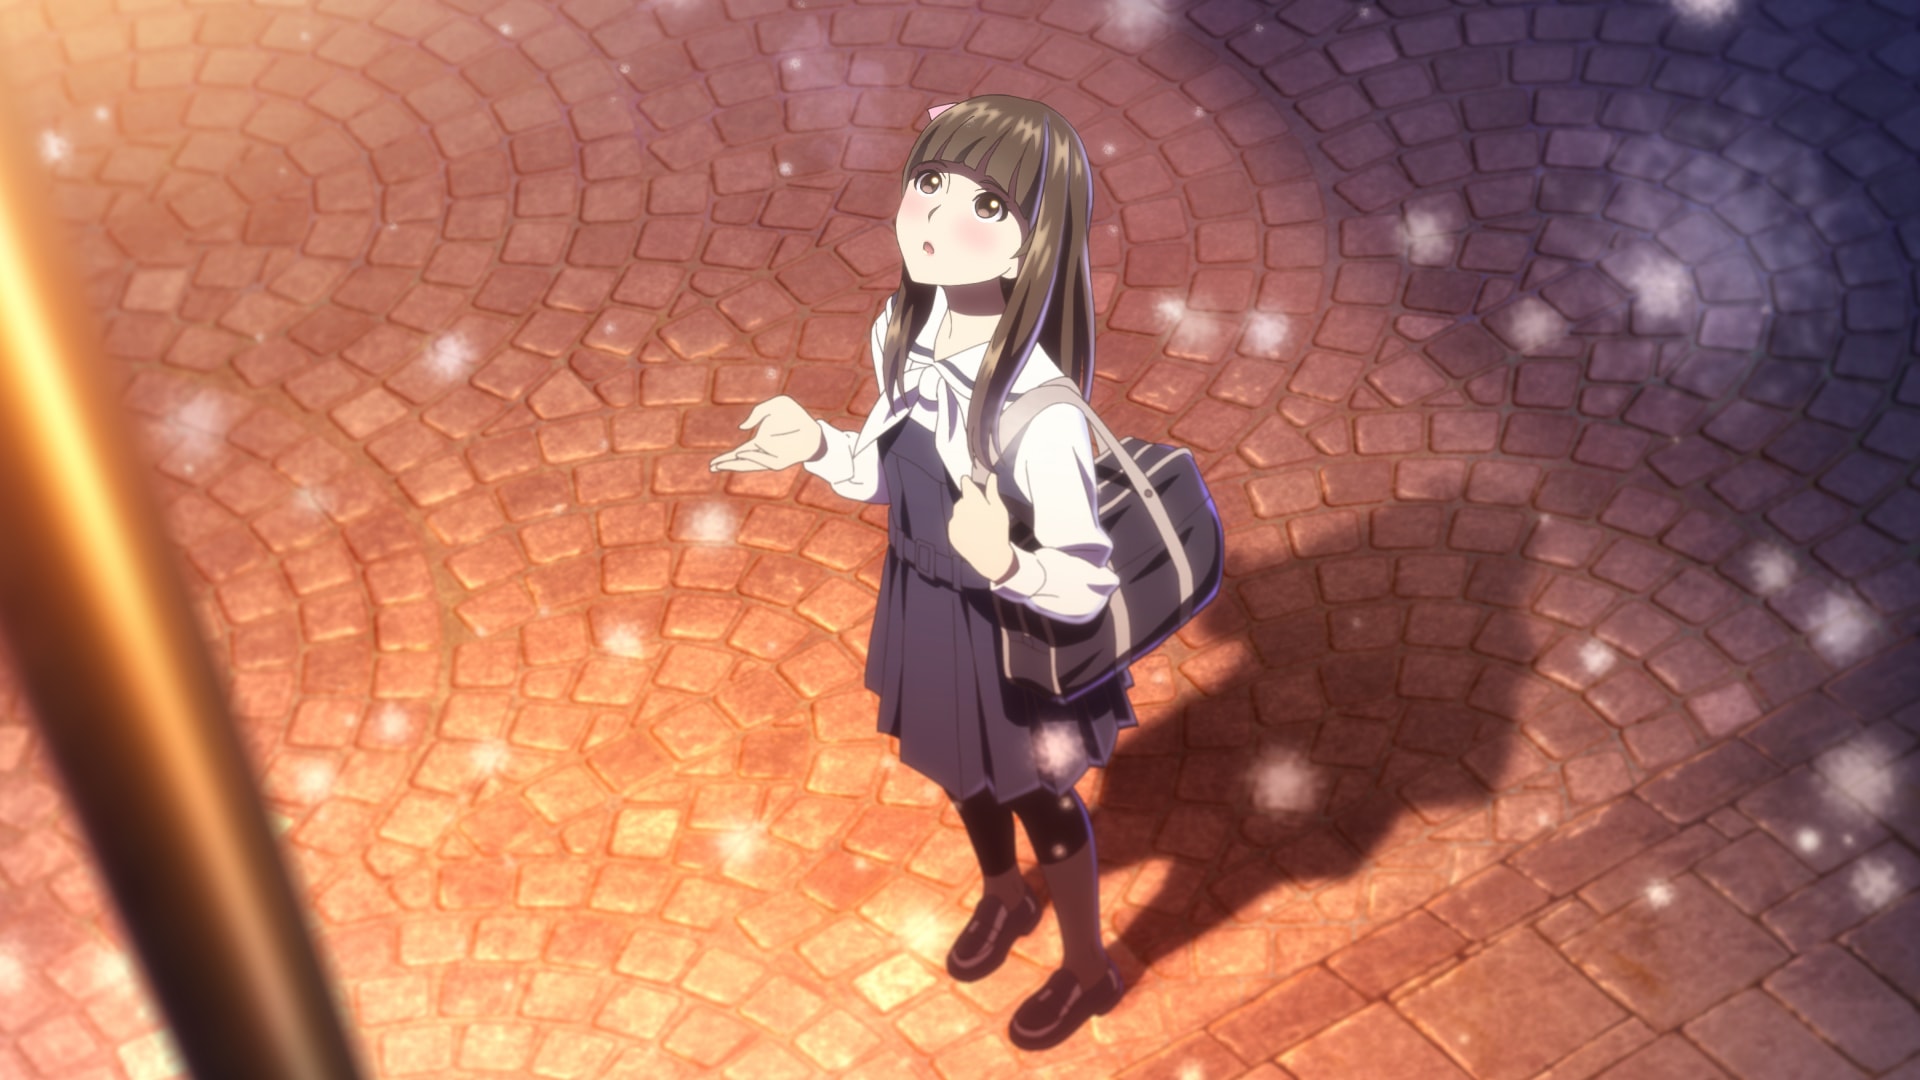 Root Letter Backgrounds, Compatible - PC, Mobile, Gadgets| 1920x1080 px